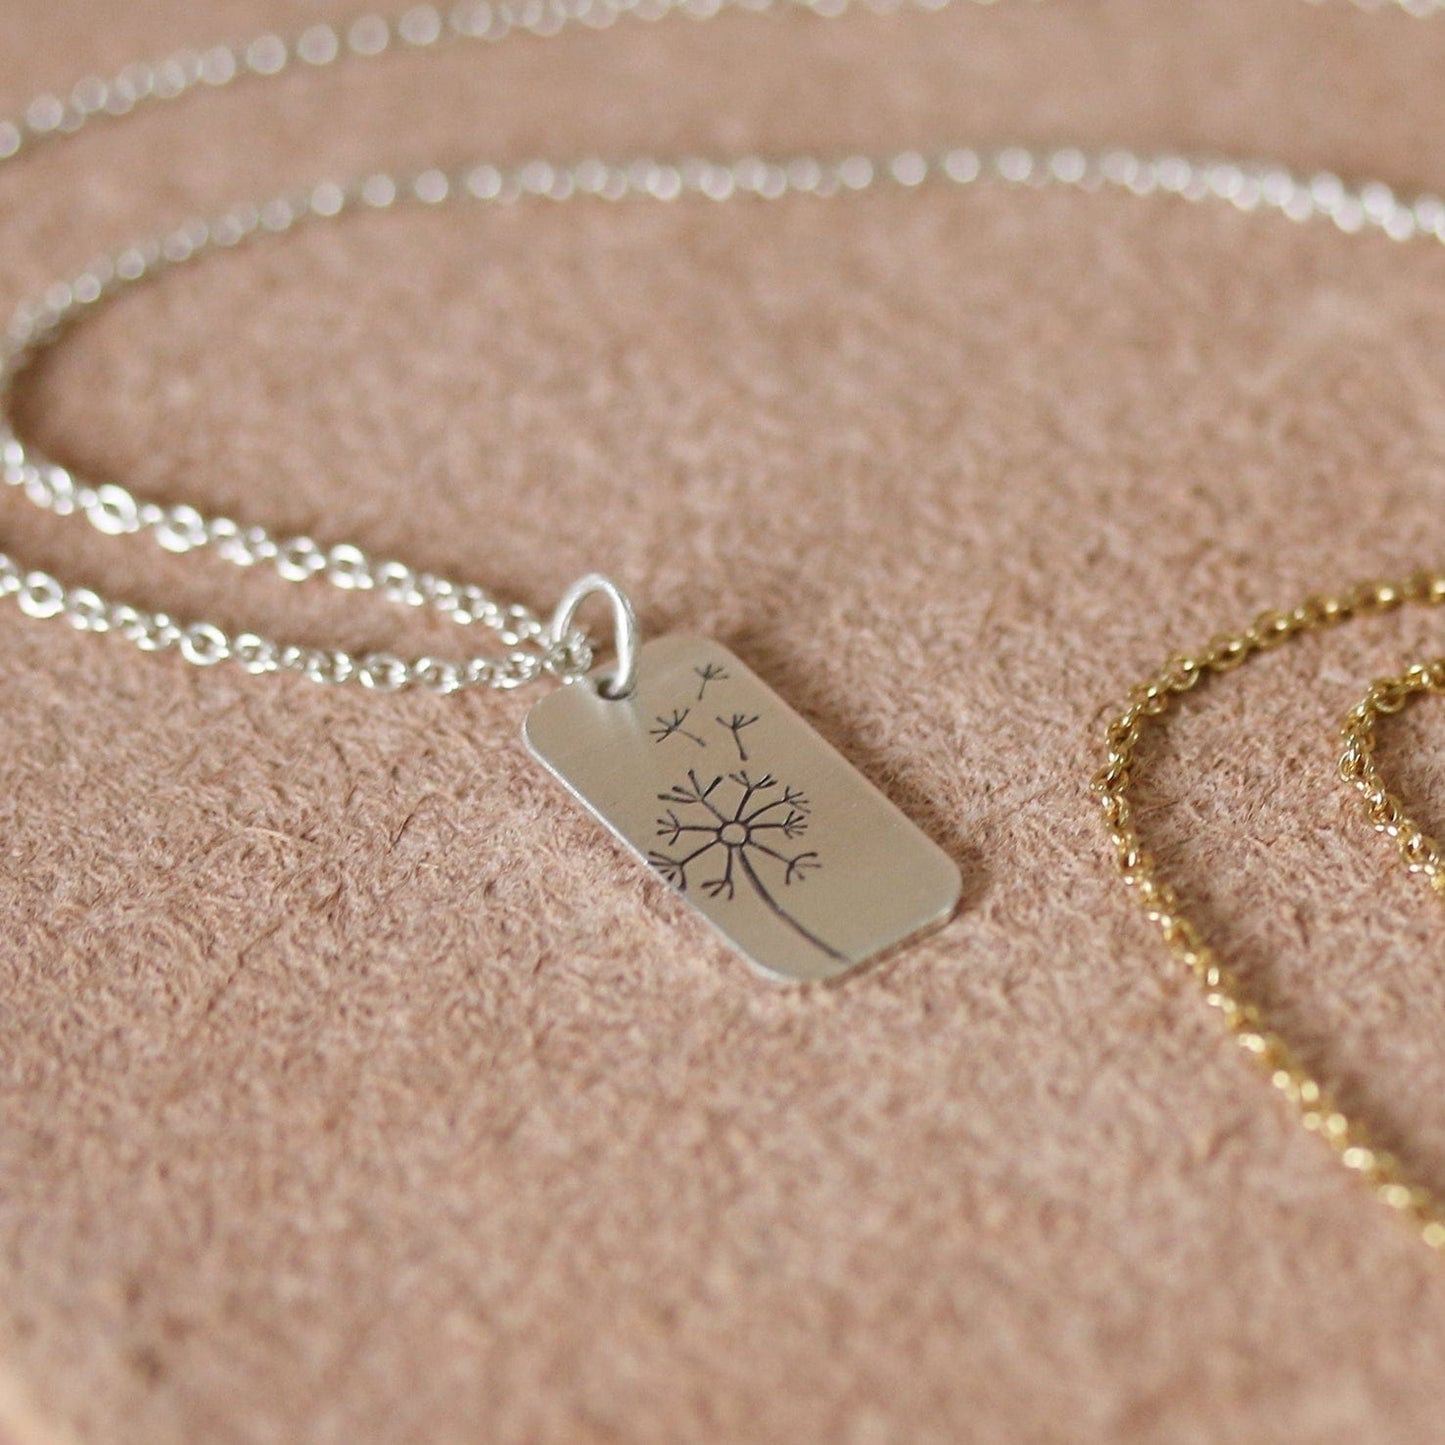 NKL Dandelion Petite Tag Necklace - Wishing Necklace in Sterling Silver